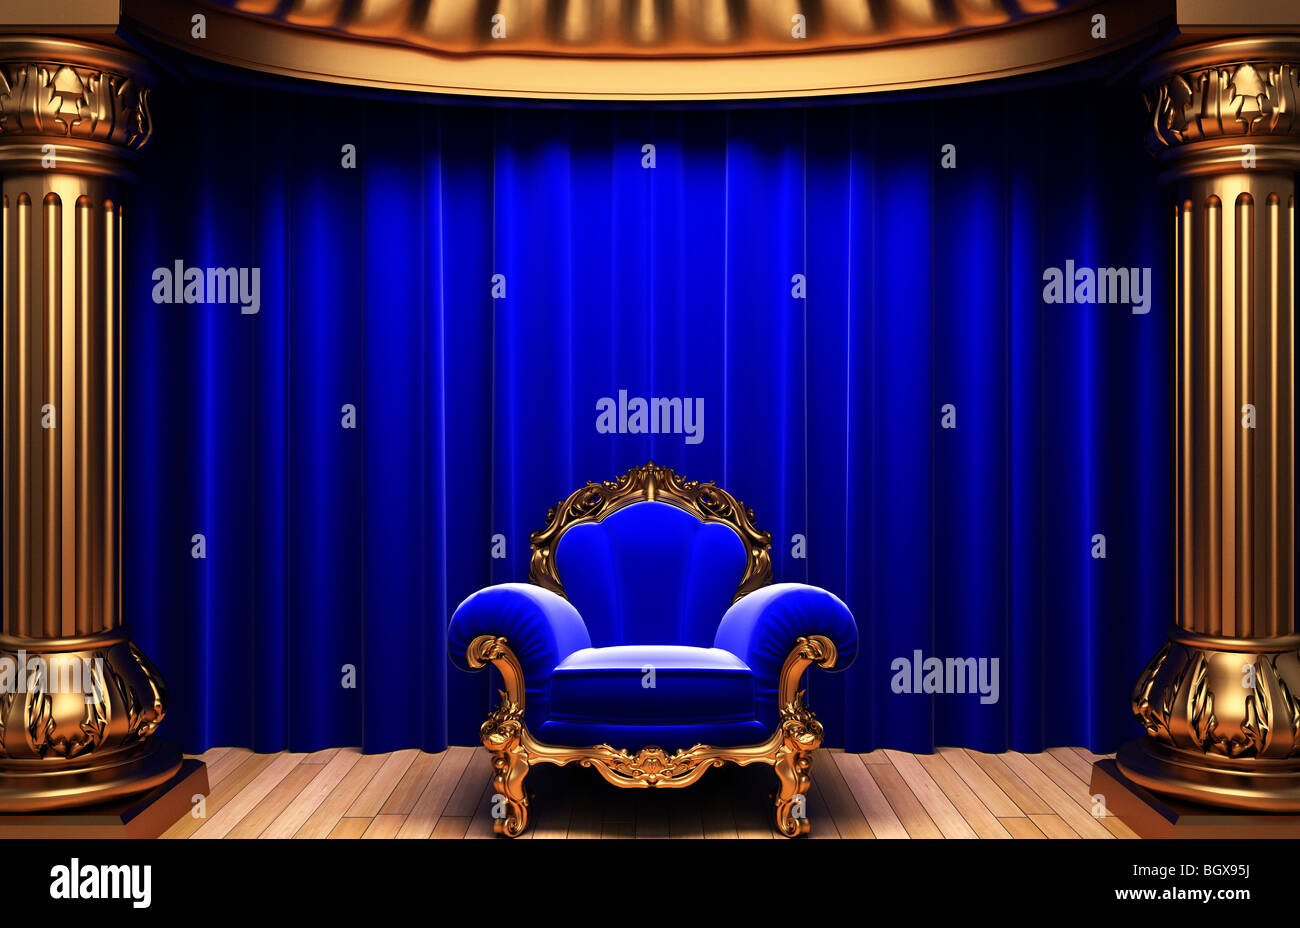 blue velvet curtains, gold columns and chair Stock Photo